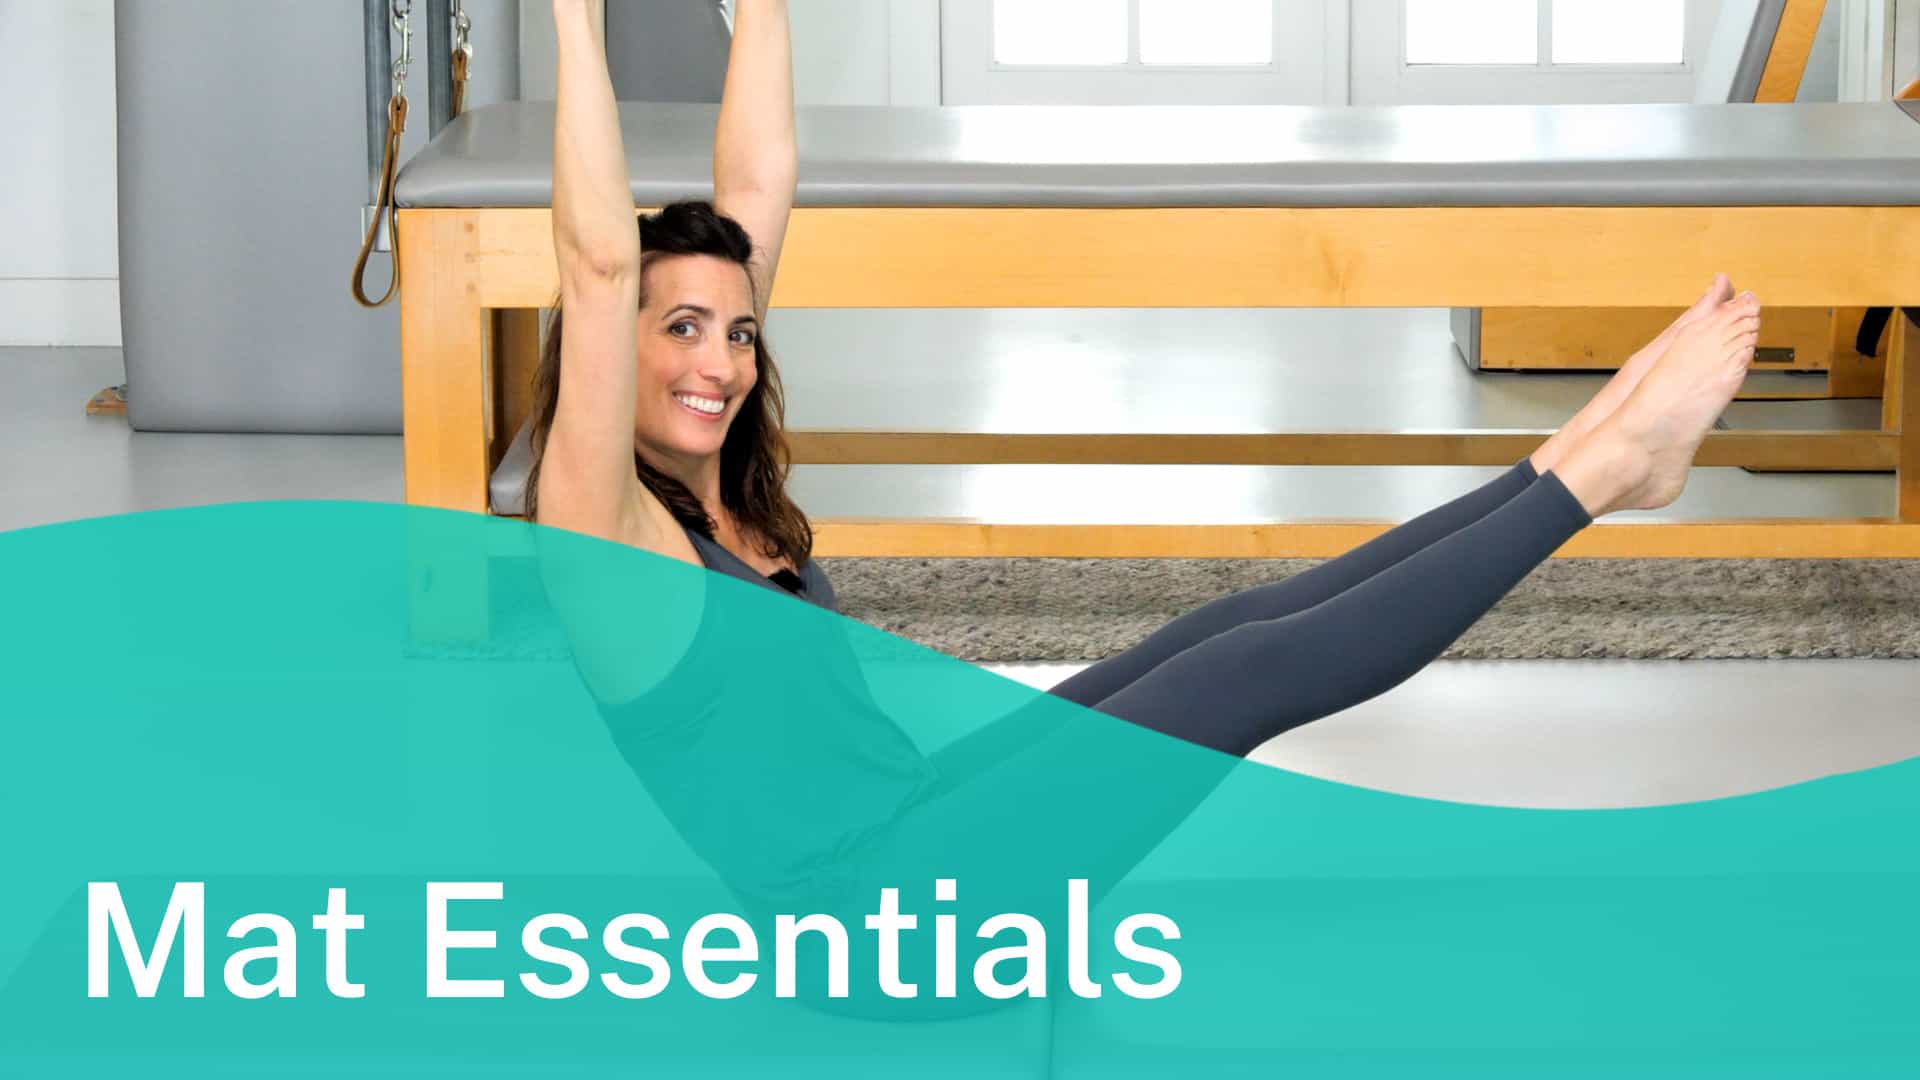 Workouts Focusing on 6 Essential Pilates Concepts